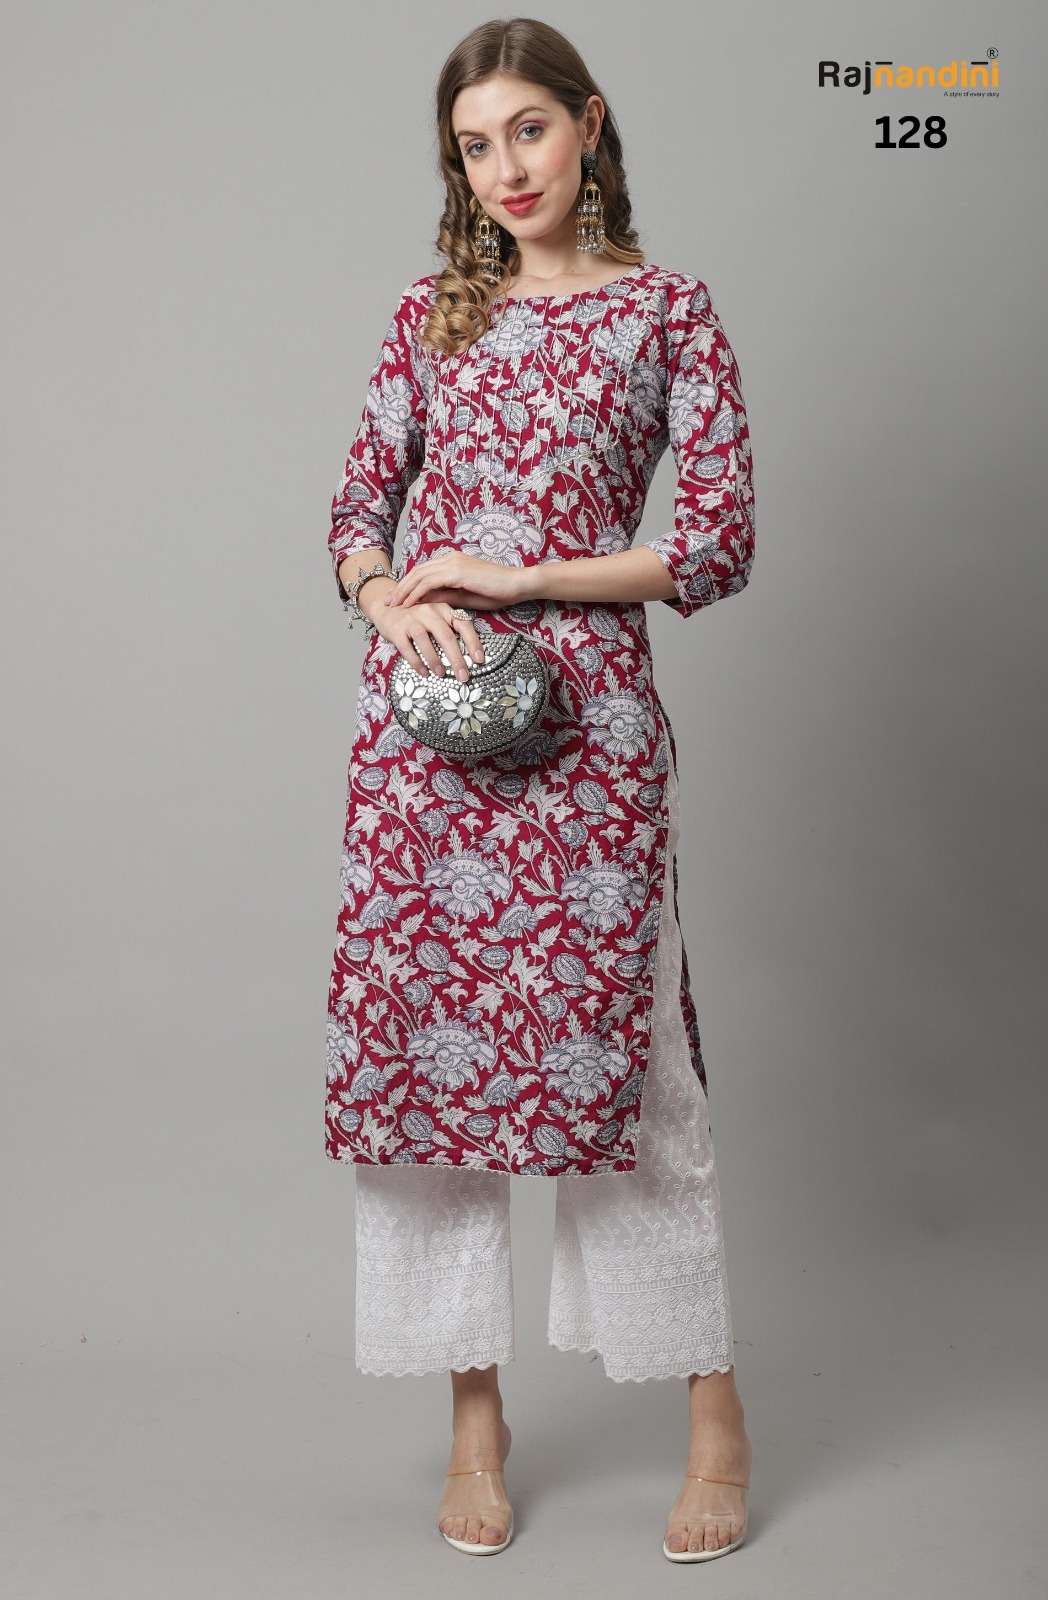 SUMMER PURE COTTON PRINTED KURTI BY RAJNANDINI BRAND WHOLESALER AND DEALER 